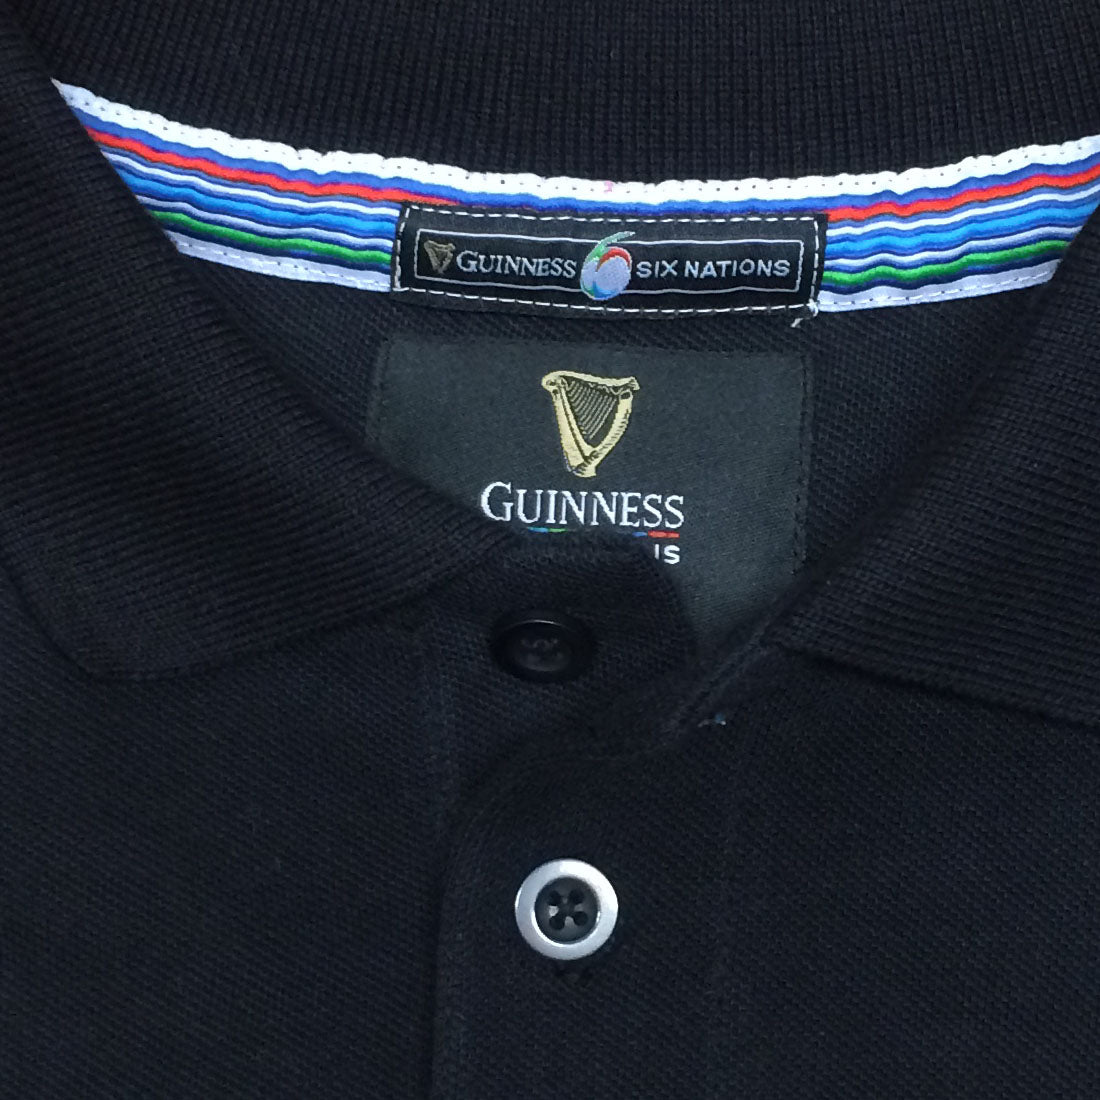 Six Nations Black Polo Shirt with a striped collar detail, featuring a Guinness Six Nations label above and a Guinness brand logo embroidered below the collar, perfect for any rugby fan.